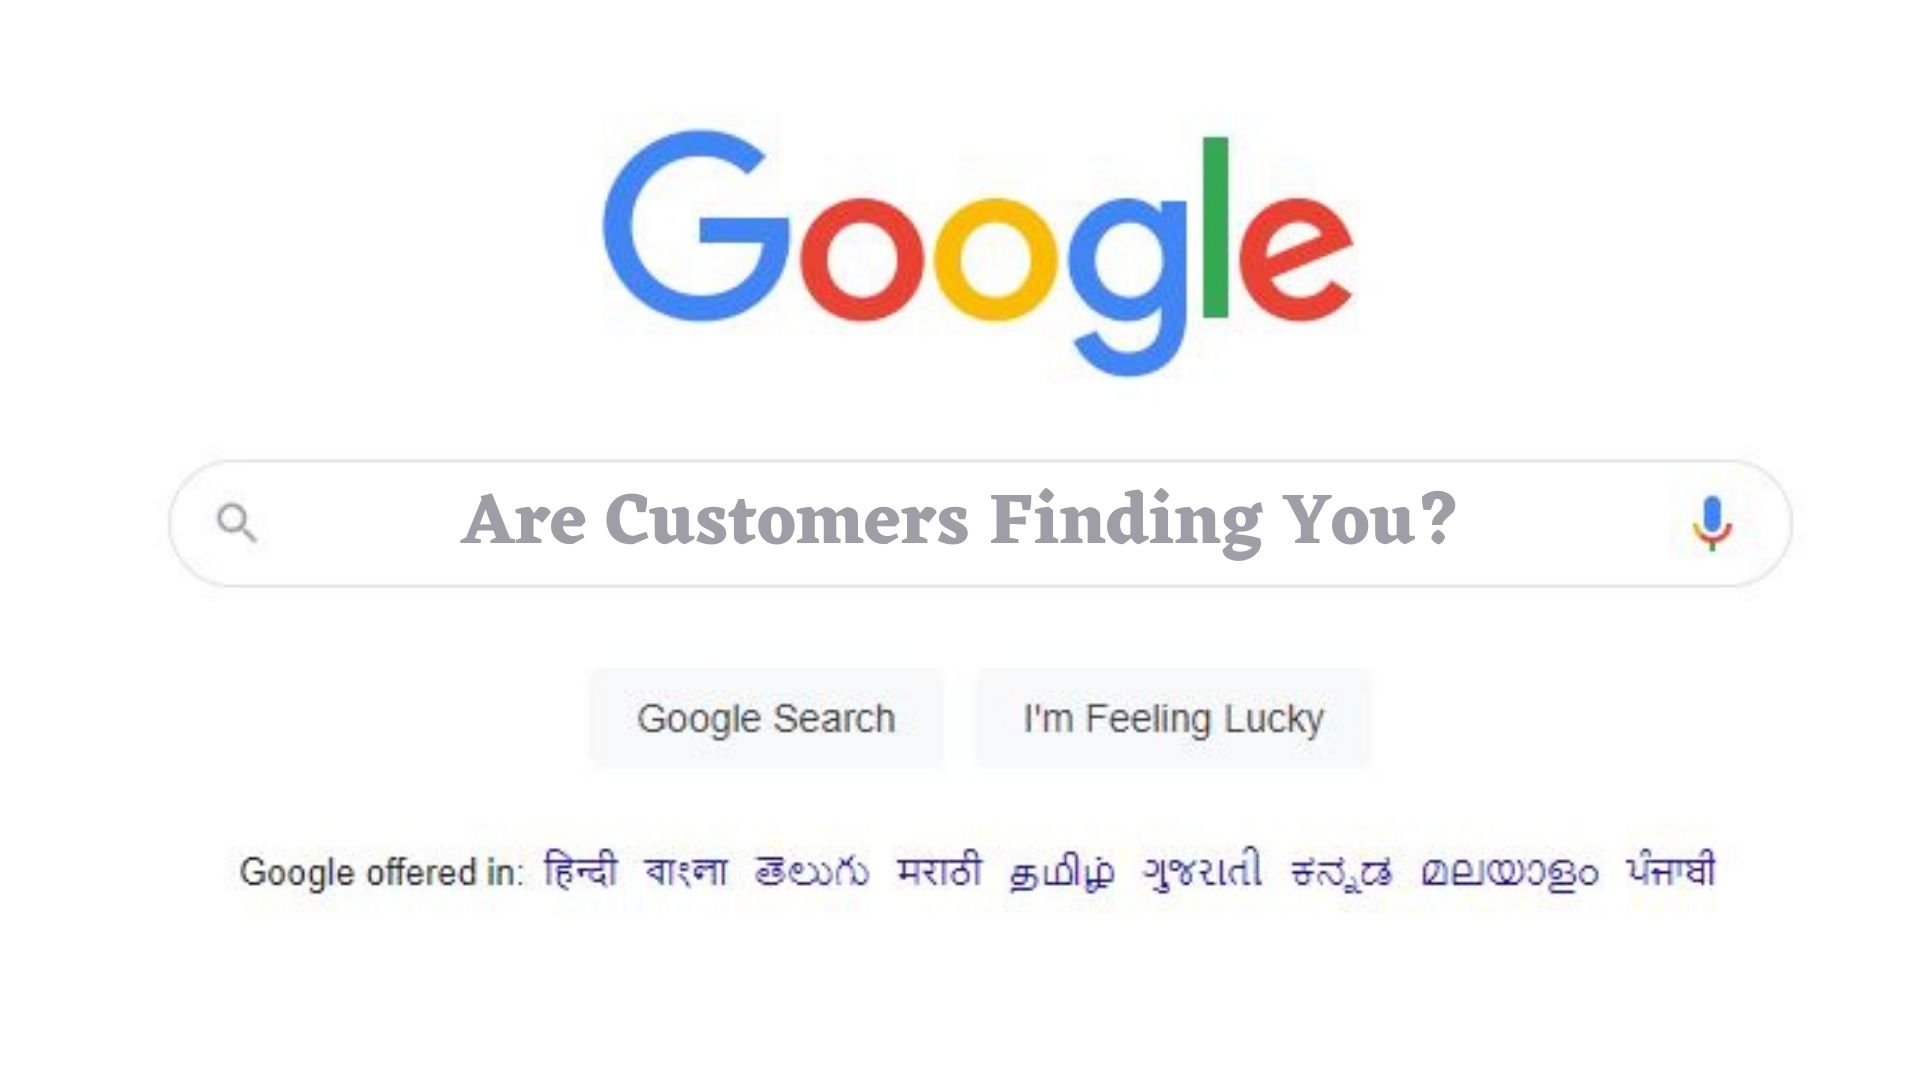 Are Customers Finding You